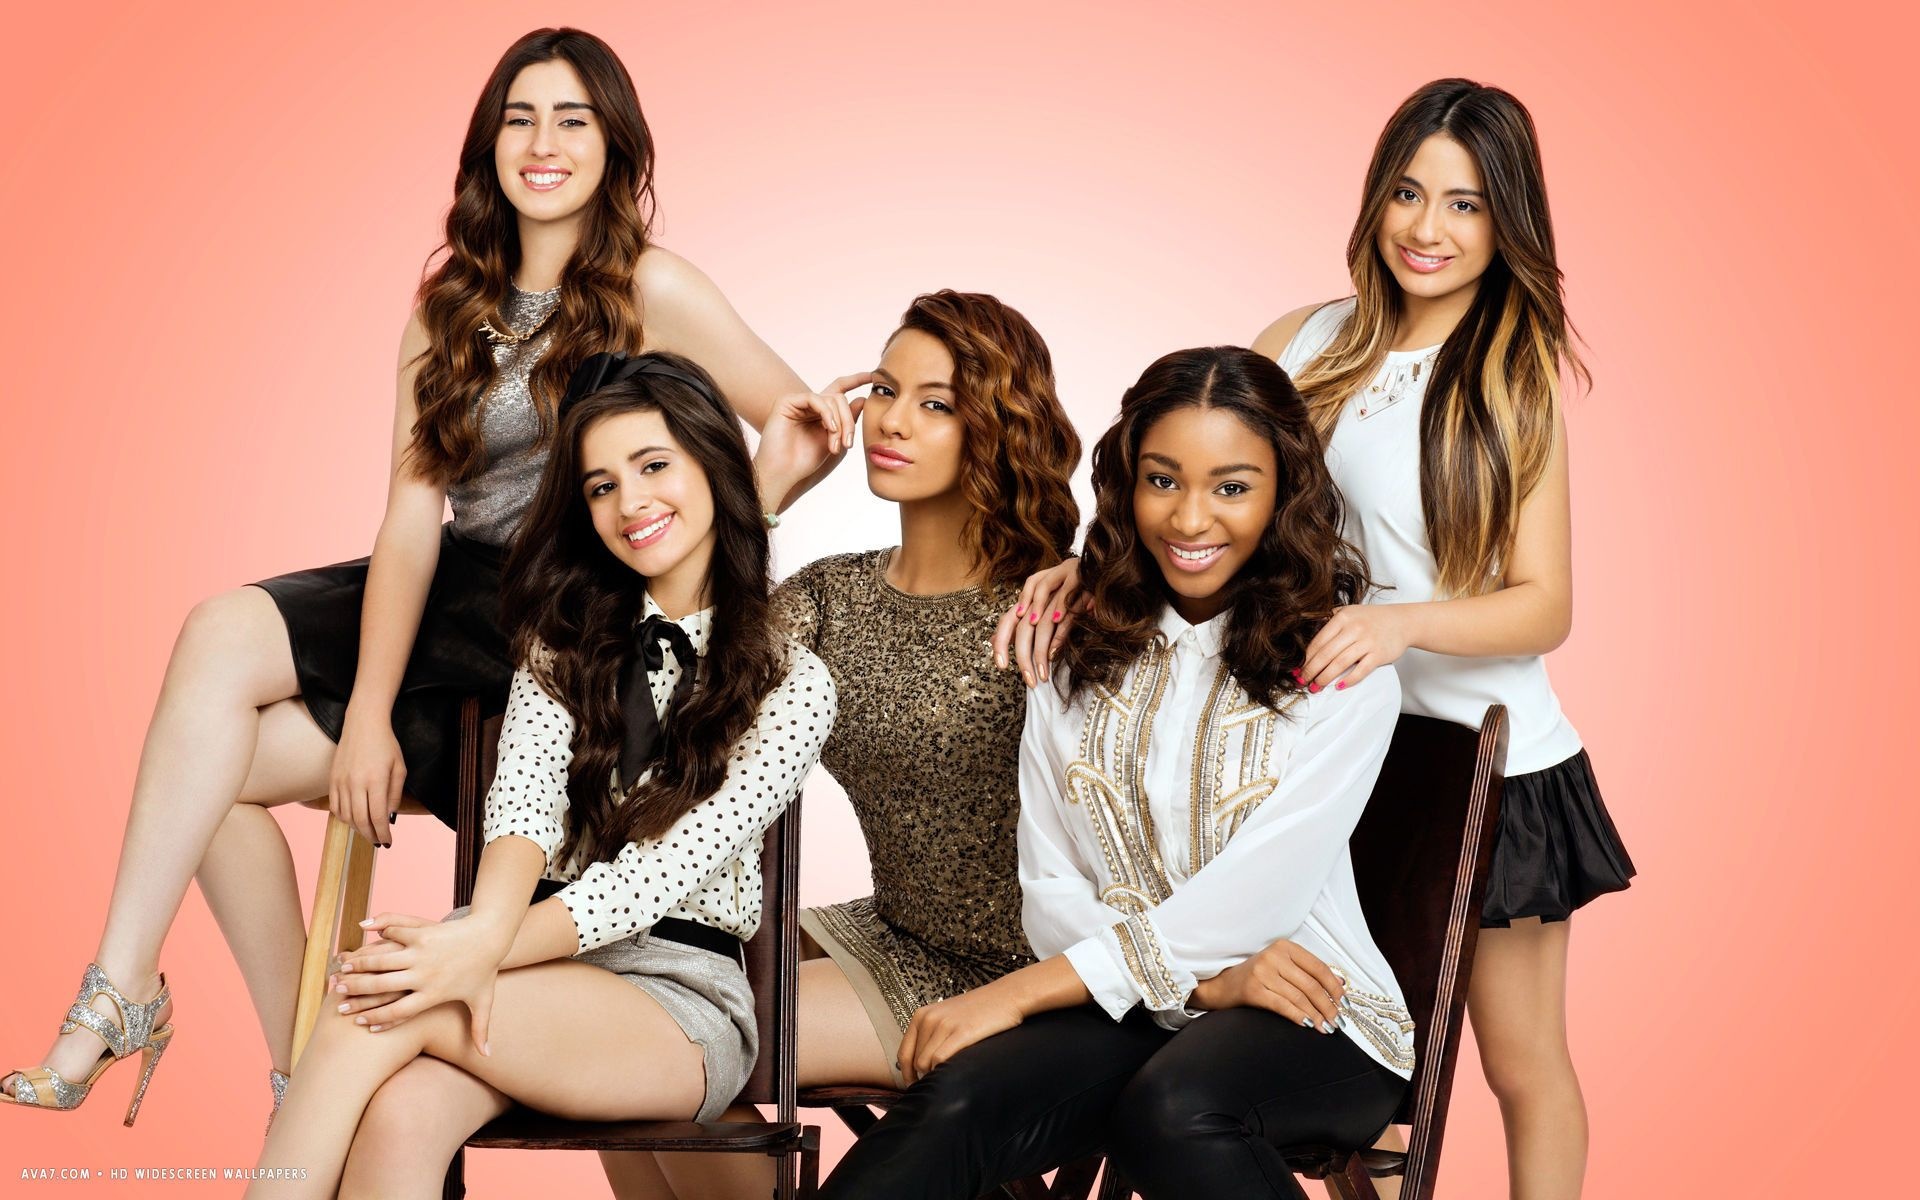 Fifth Harmony Wallpapers, Musical Vibes, Harmonious Beauties, Picture Perfect, 1920x1200 HD Desktop